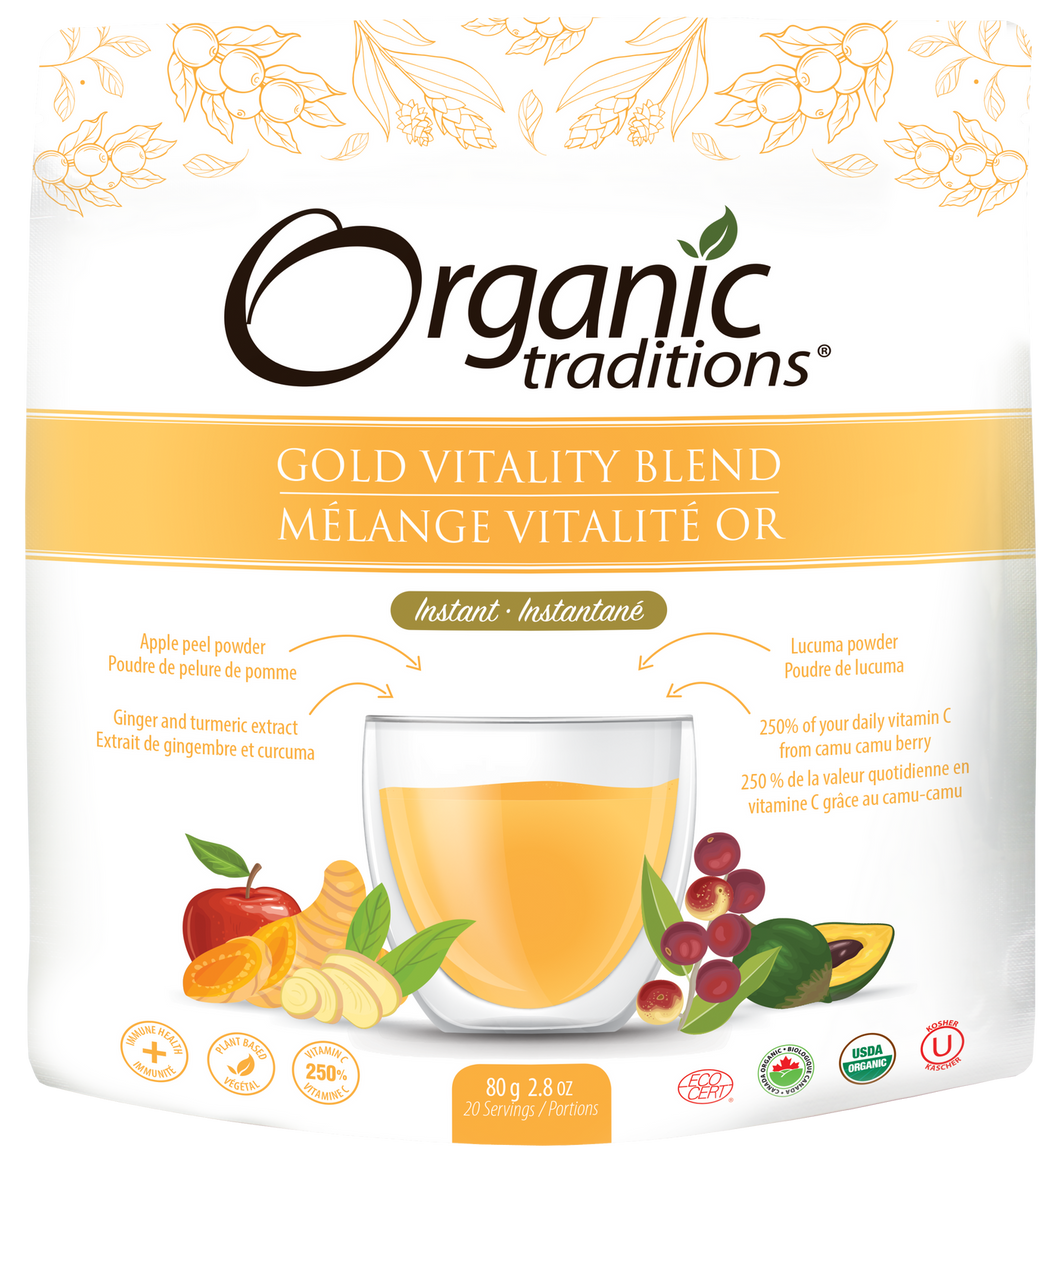 Gold Vitality Blend - Organic Traditions